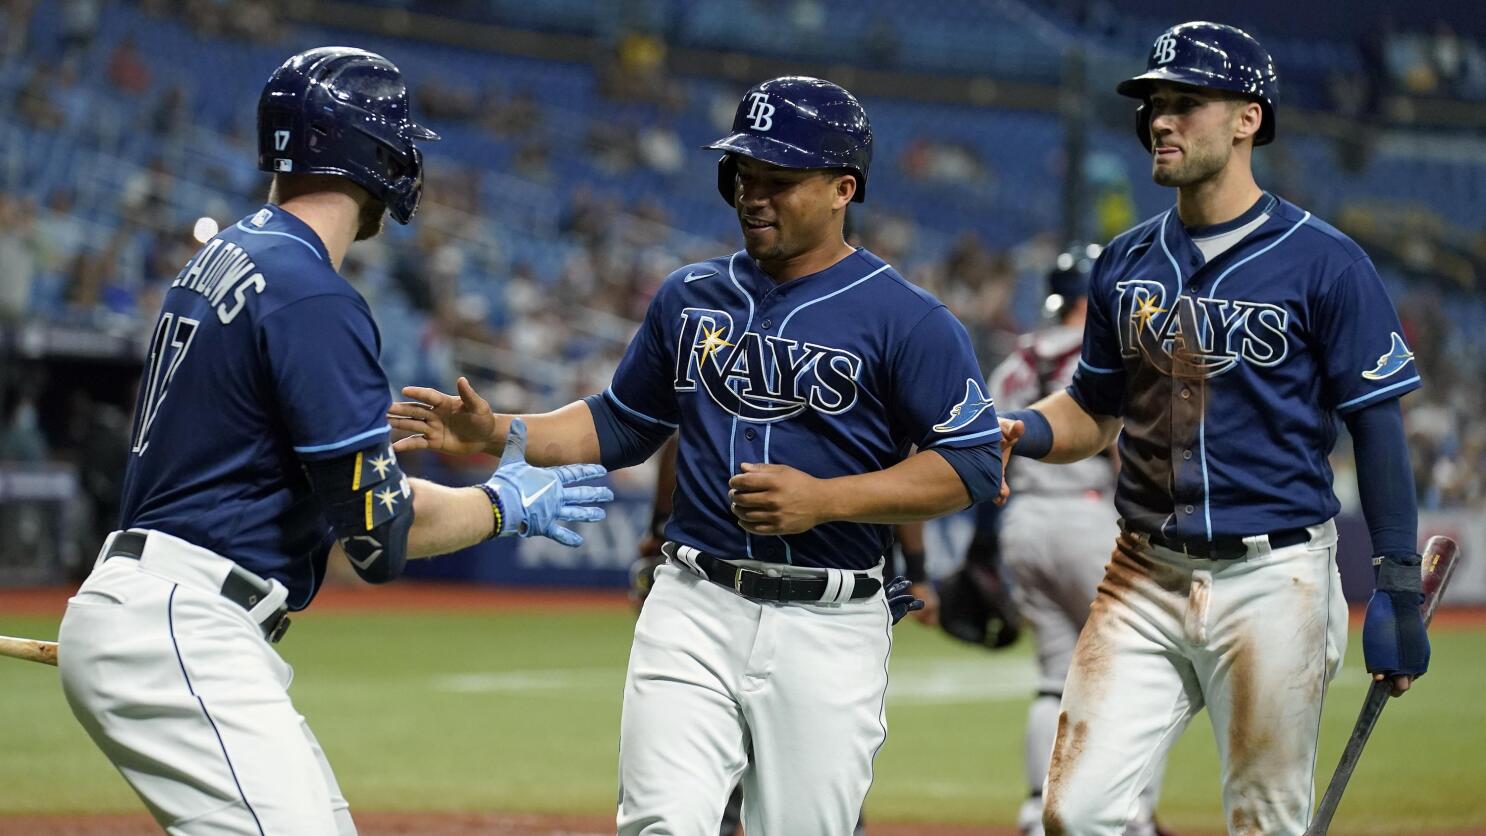 Franco, Diaz help Rays rally for walk-off win vs. Indians